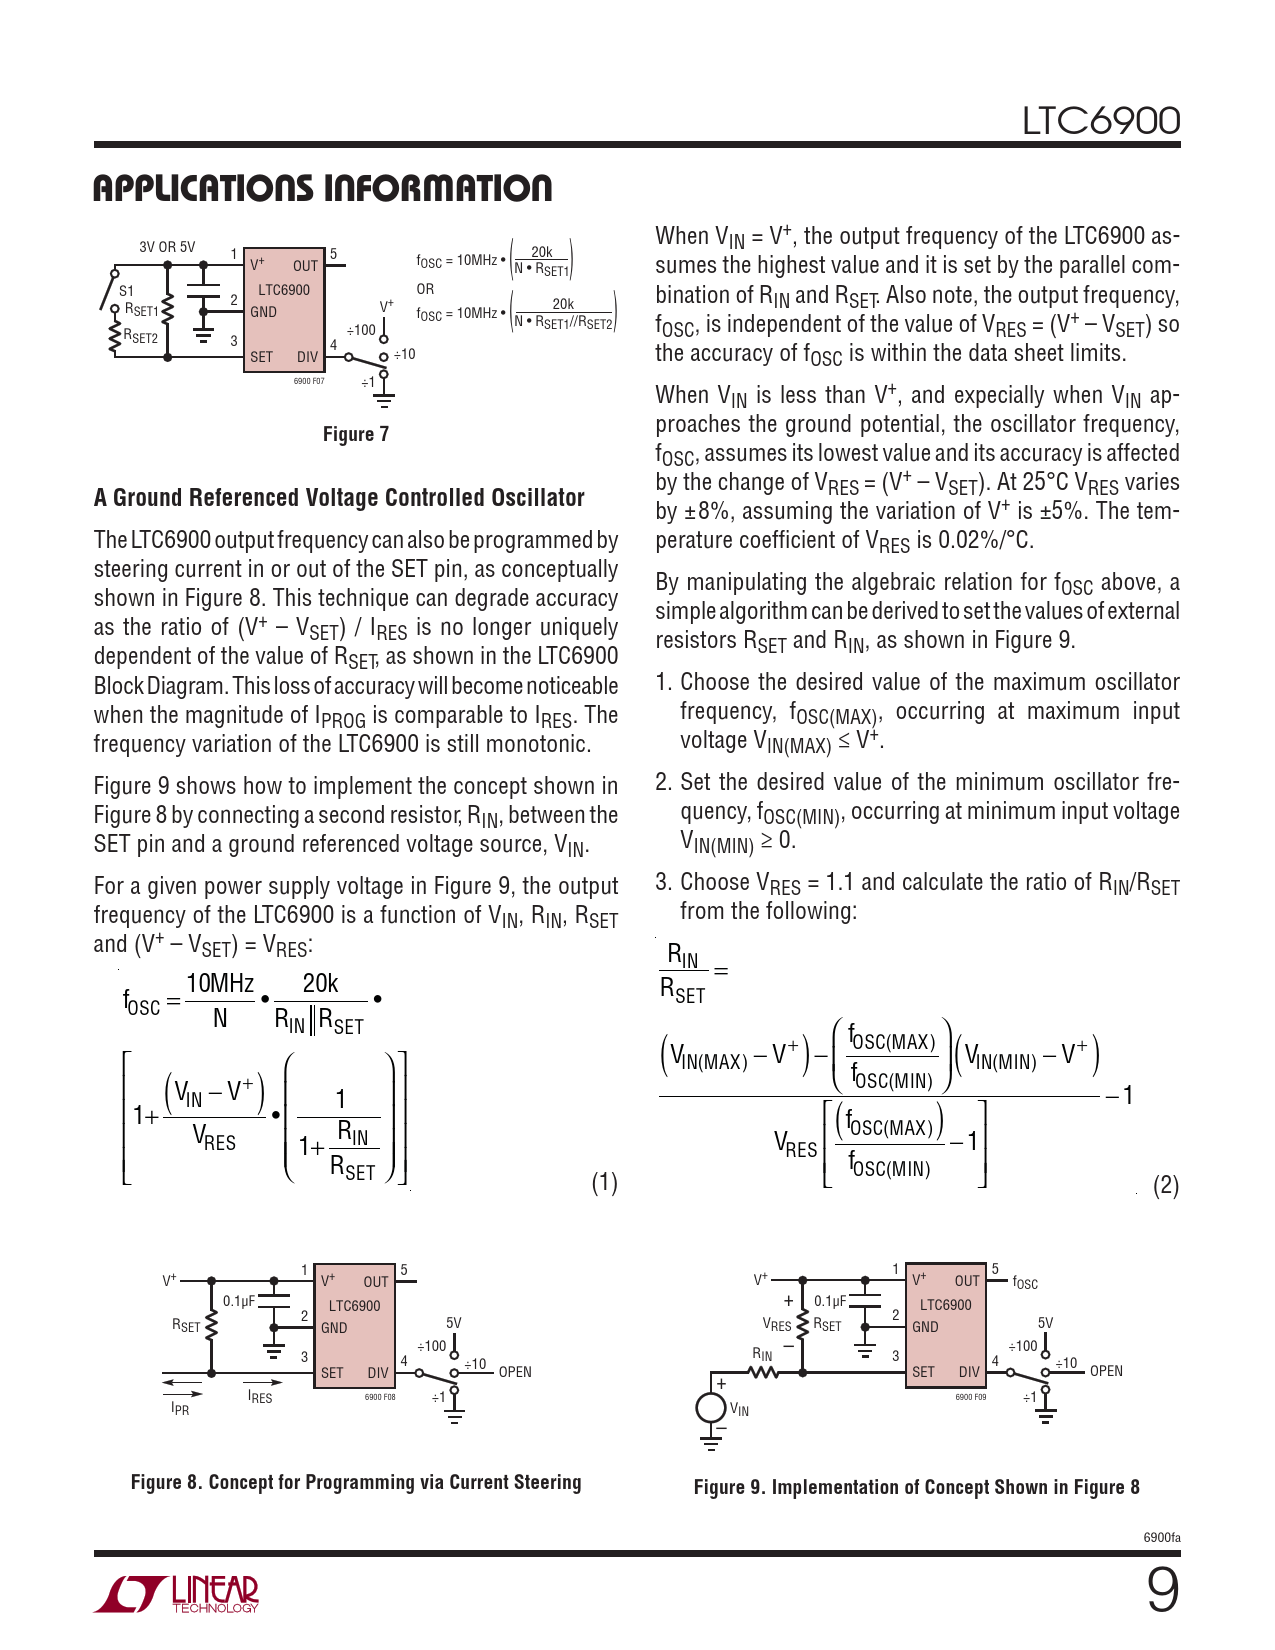 APPLICATIONS INFORMATION Figure 7 A Ground Referenced Voltage Controlled Oscillator